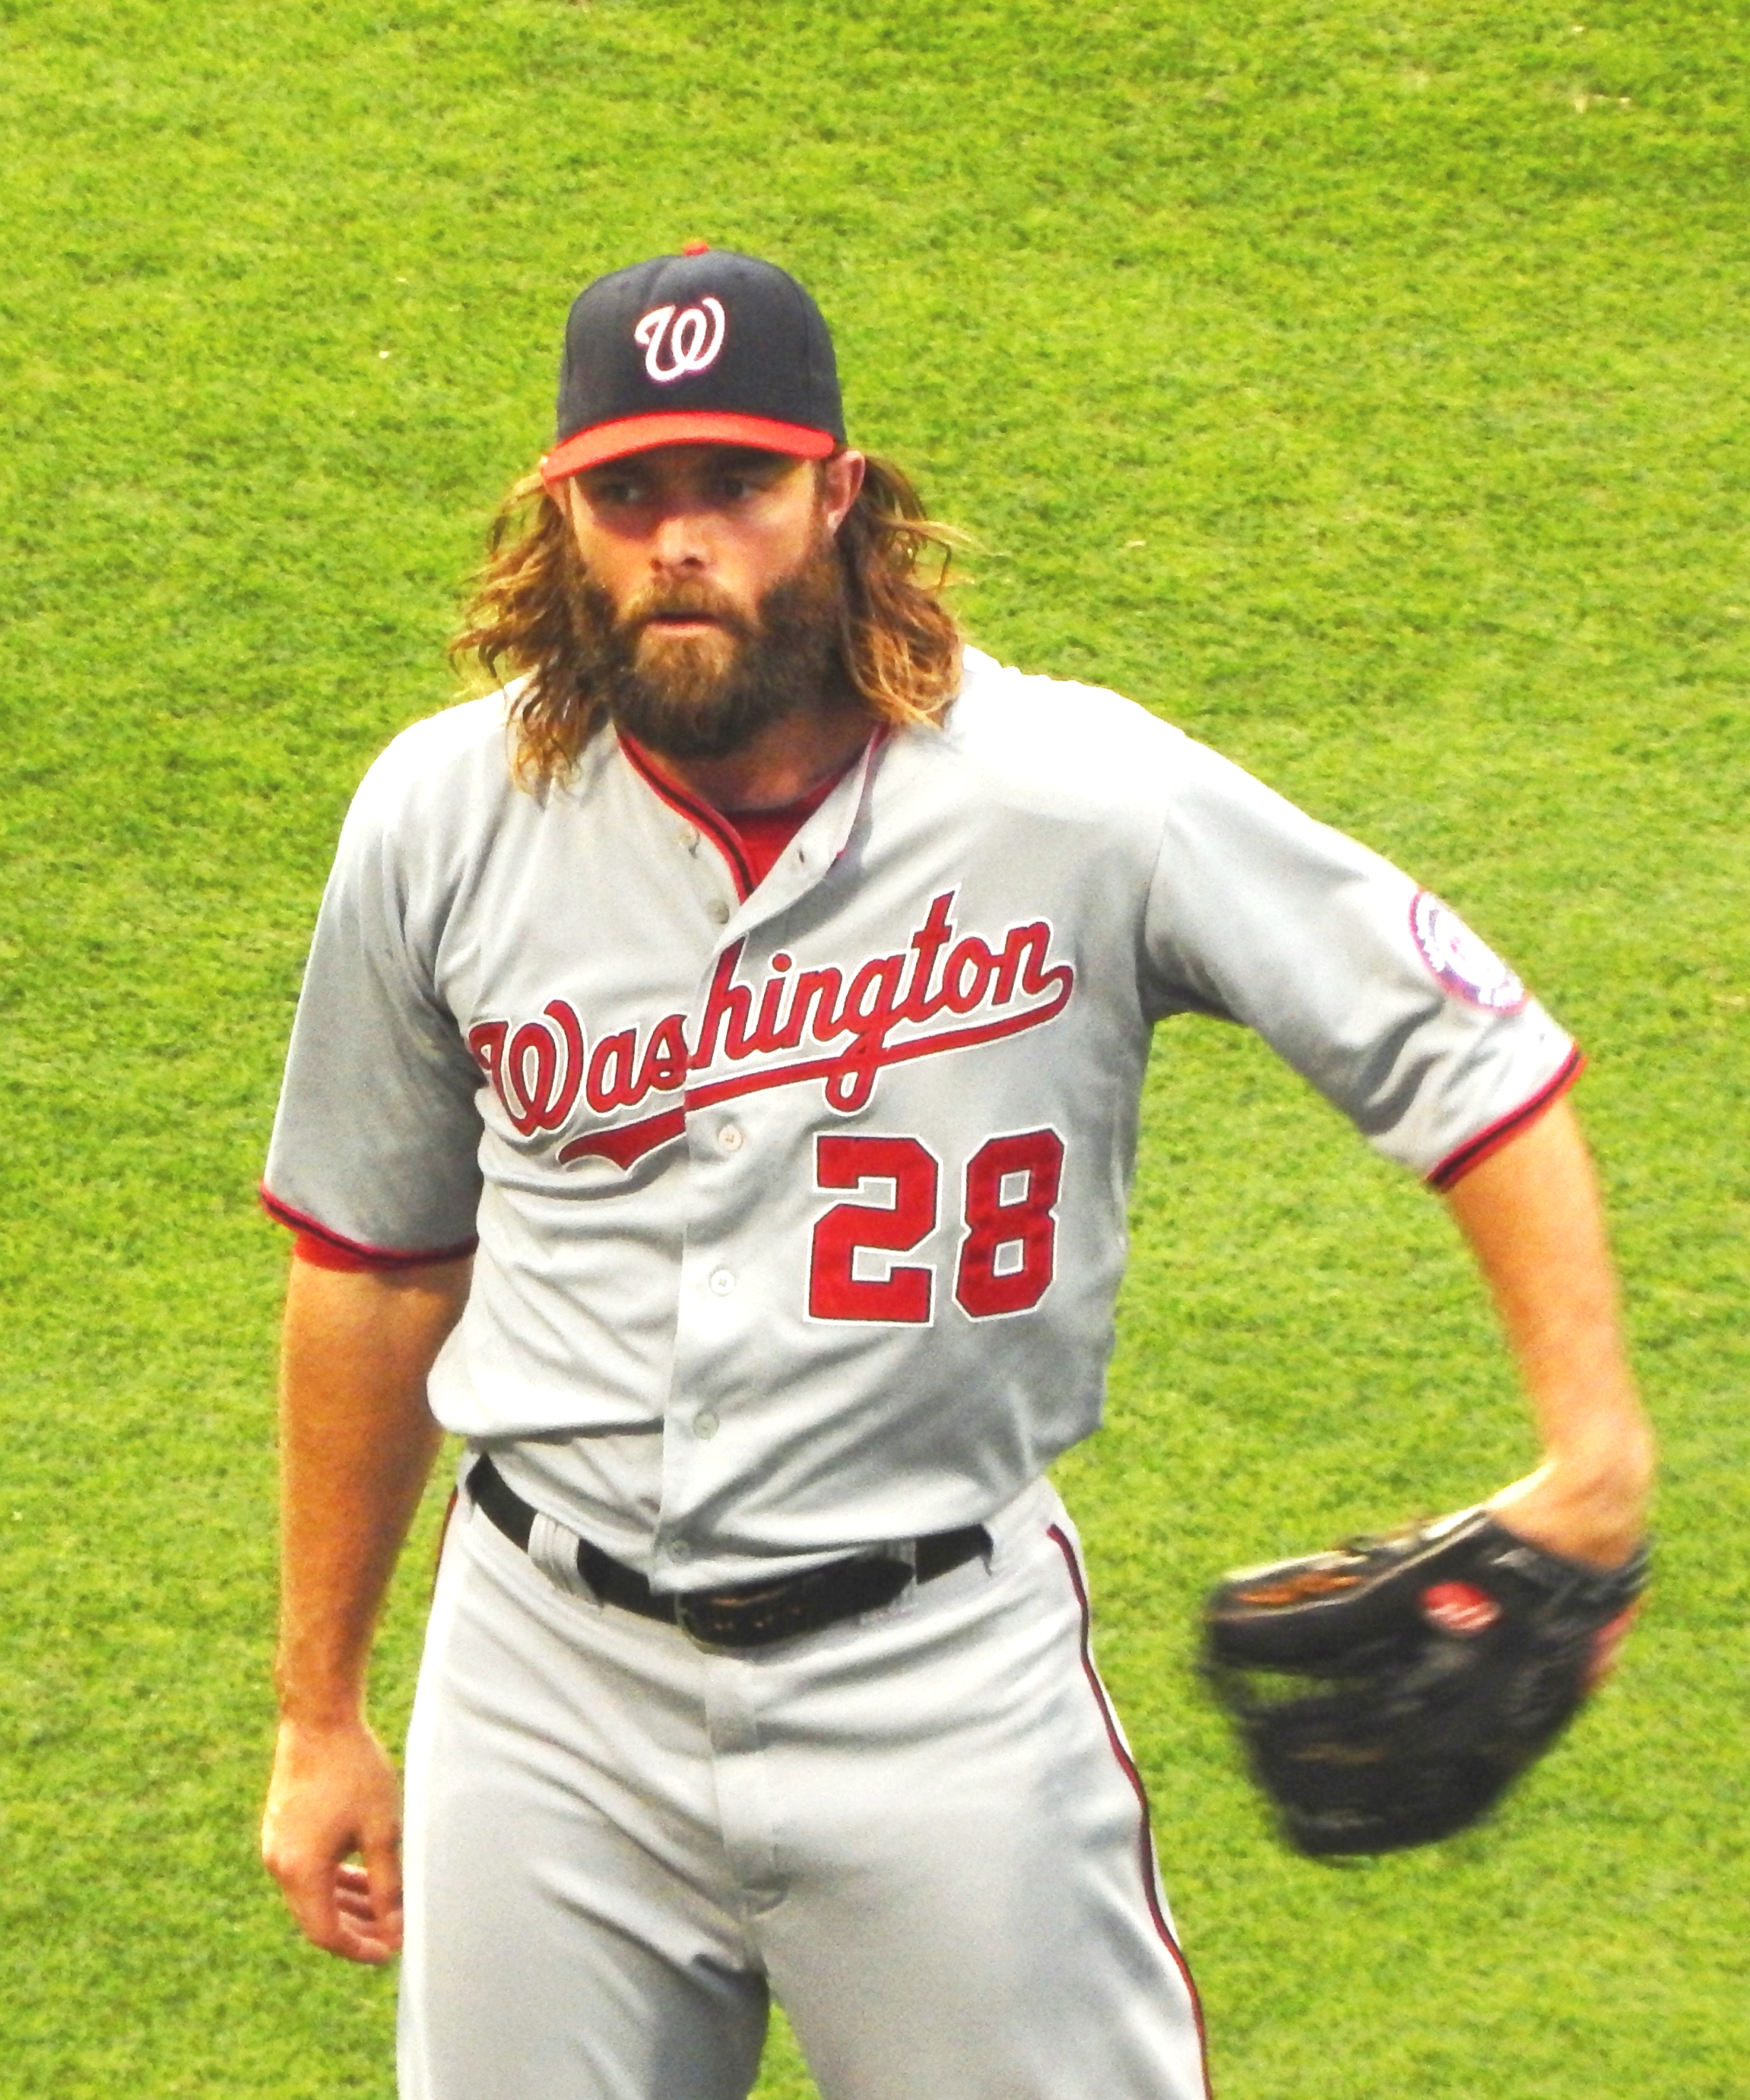 File:Jayson Werth playing left field for the Washington nationals.jpg -  Wikipedia